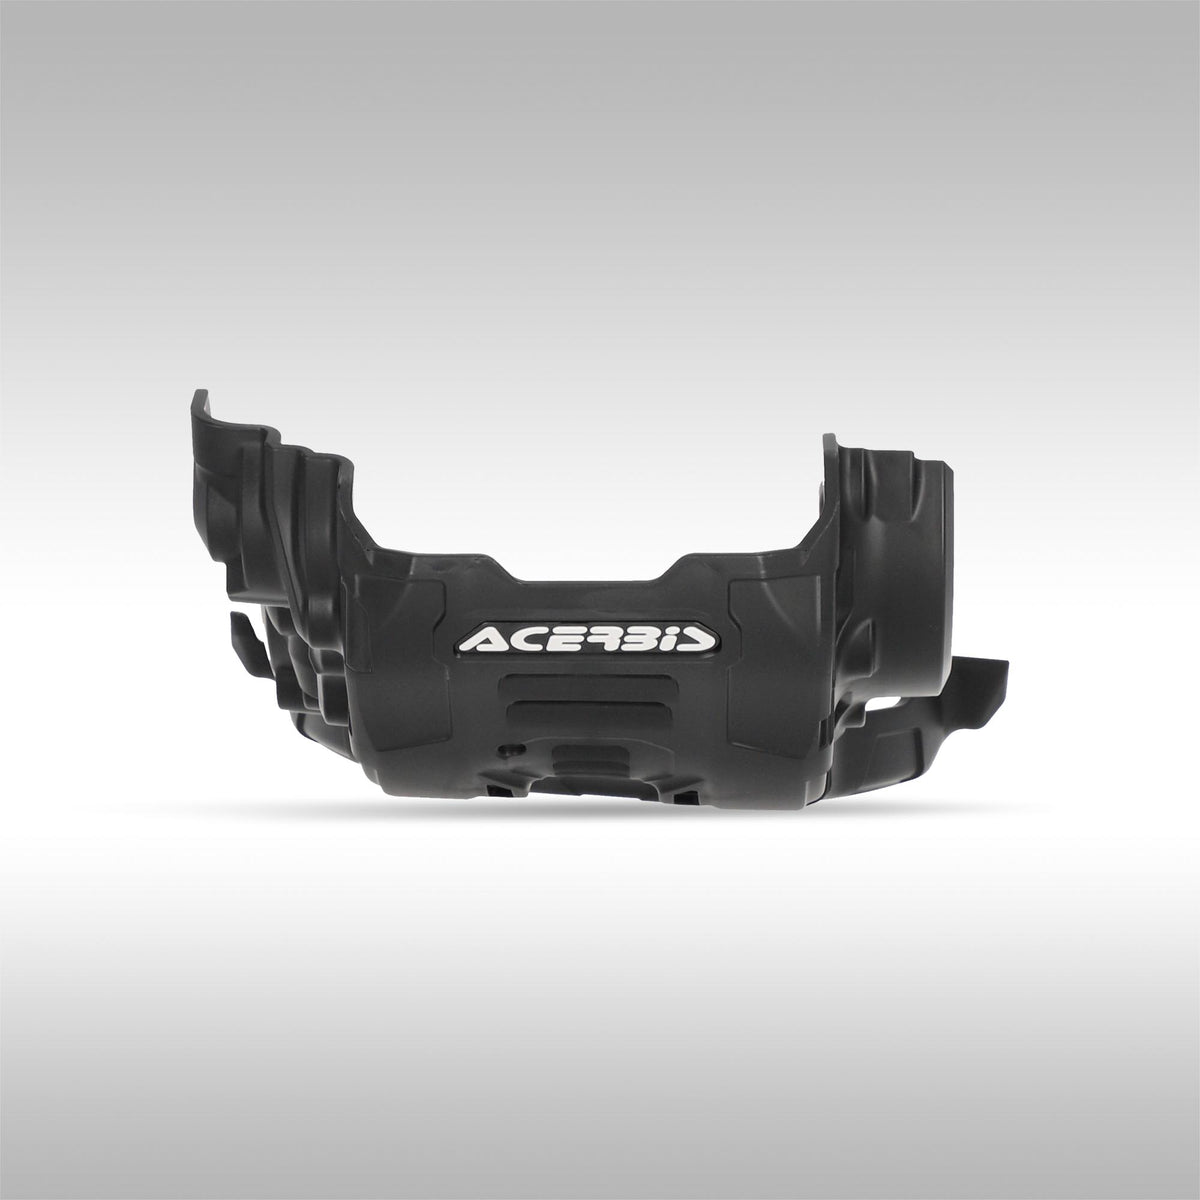 Protect the underside of your DRZ400 with Acerbis skid plate. This black plastic skid plate will stand between your bike and the elements without adding significant weight to the bottom of the machine.